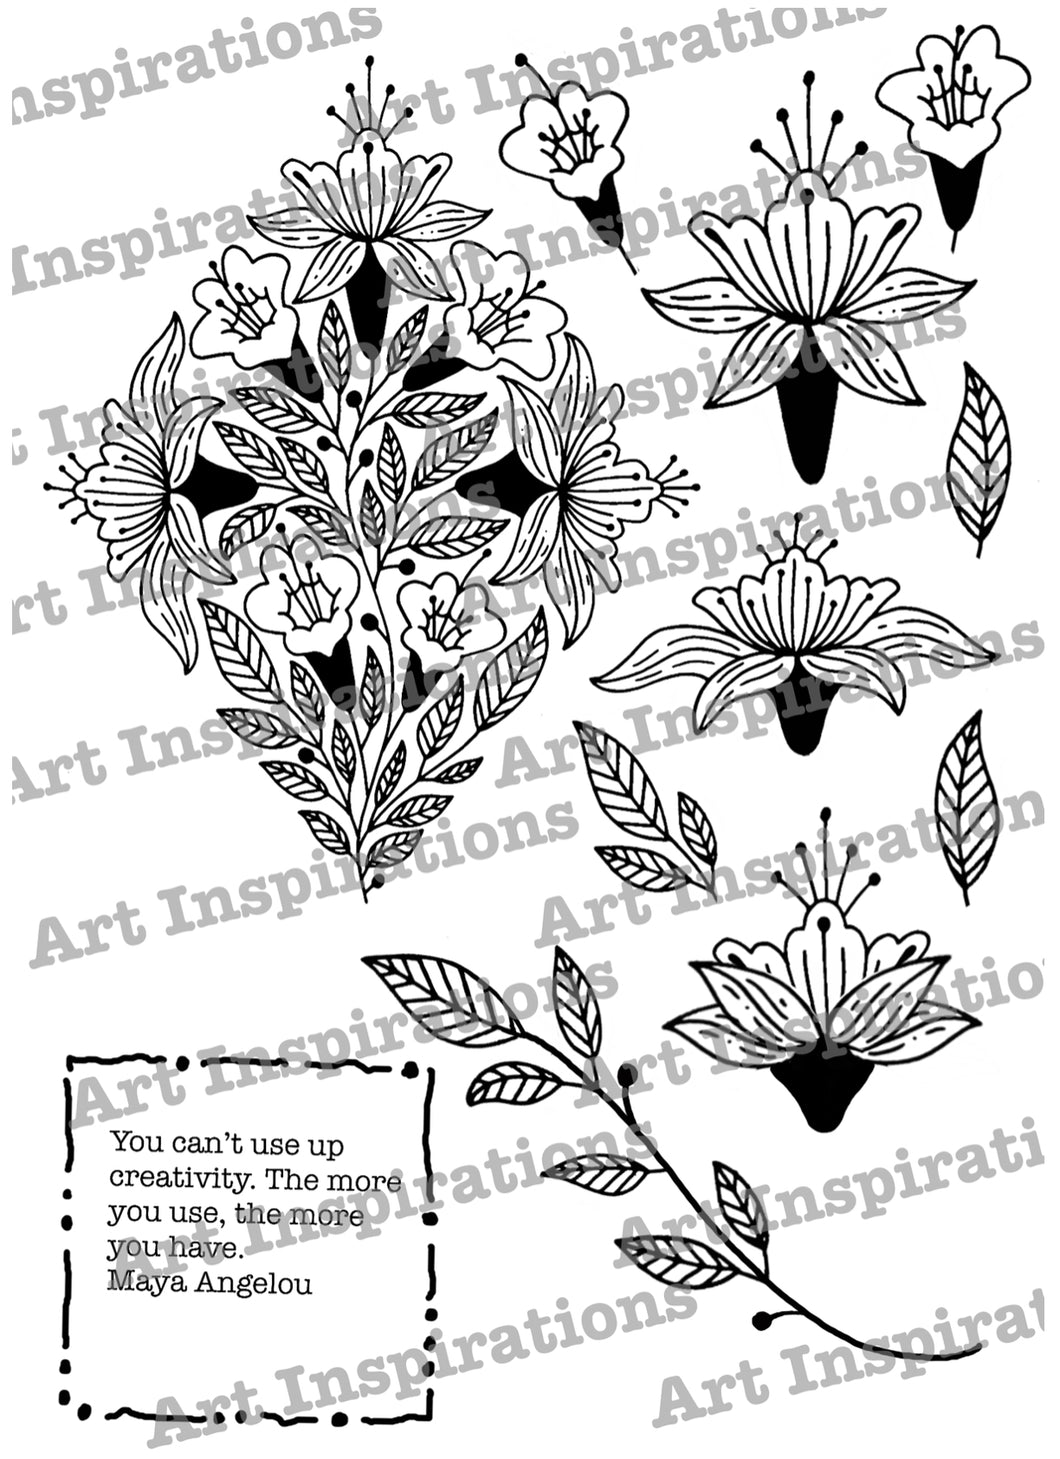 Art Inspirations by Wensdi Made A5 Clear Stamp Sheet - Use Creativity - 12 Stamps